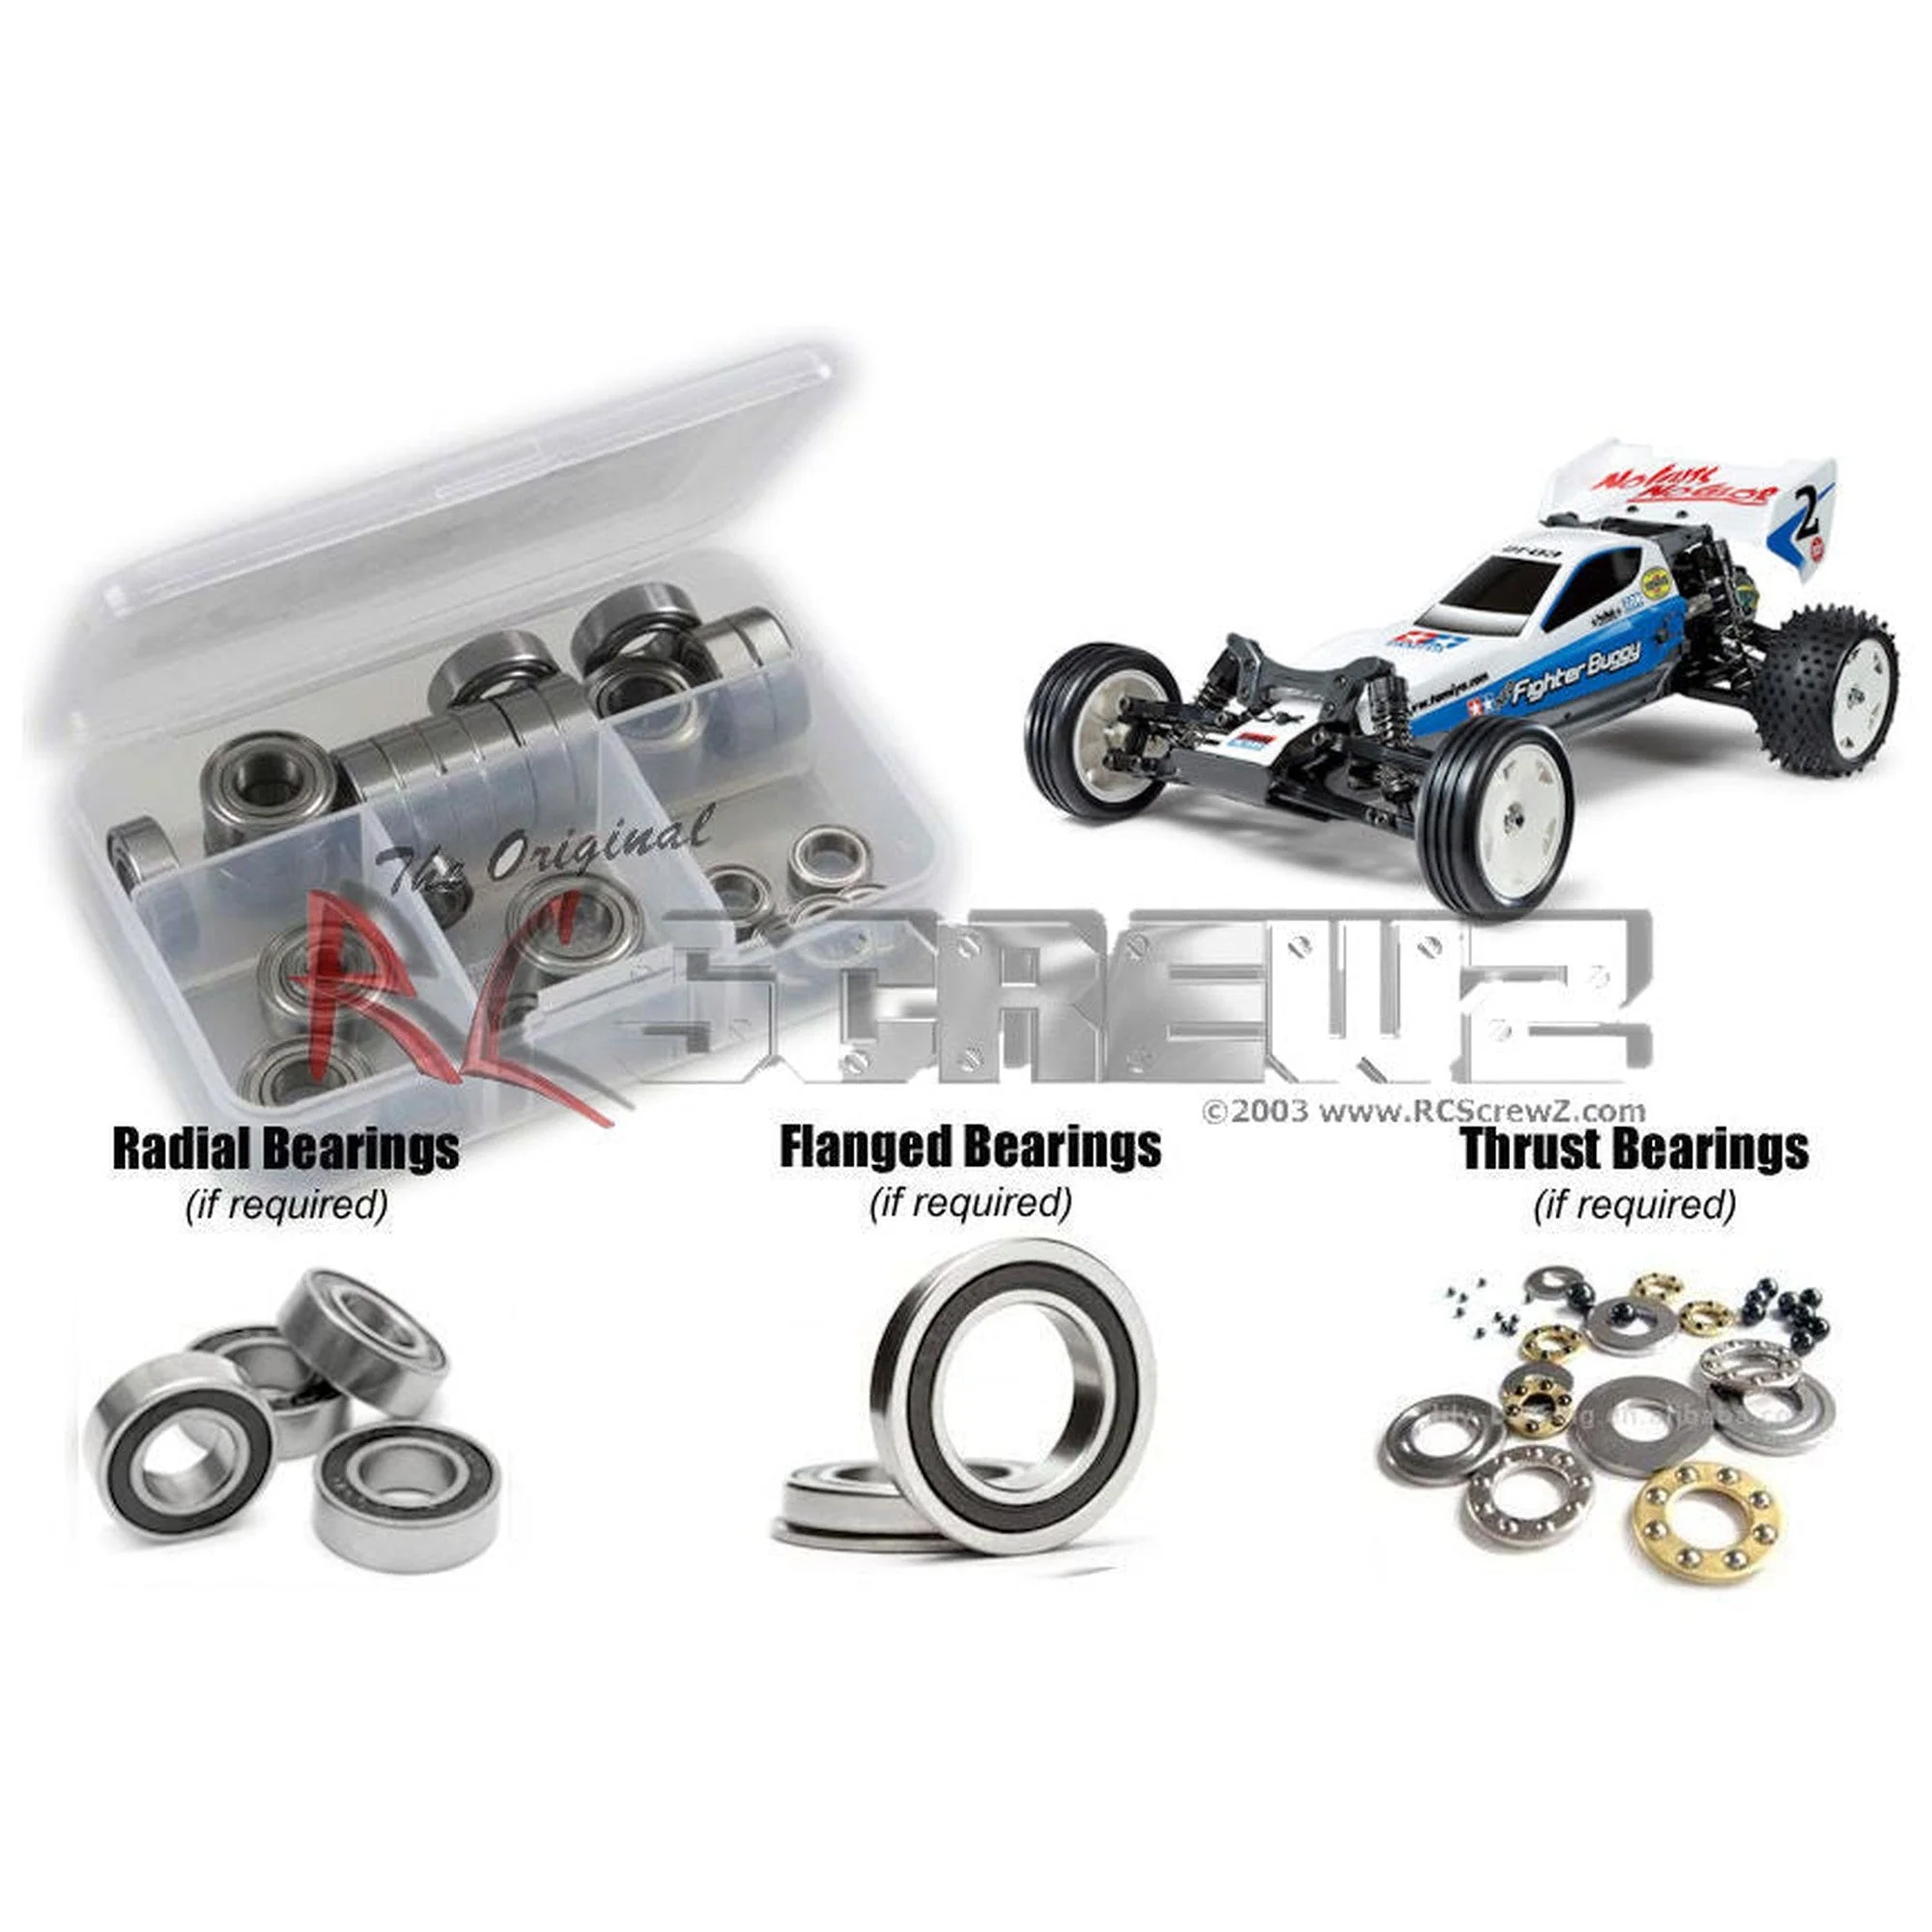 RCScrewZ Rubber Shielded Bearing Kit tam207r for Tamiya Neo Fighter Buggy #58587 - Picture 1 of 12